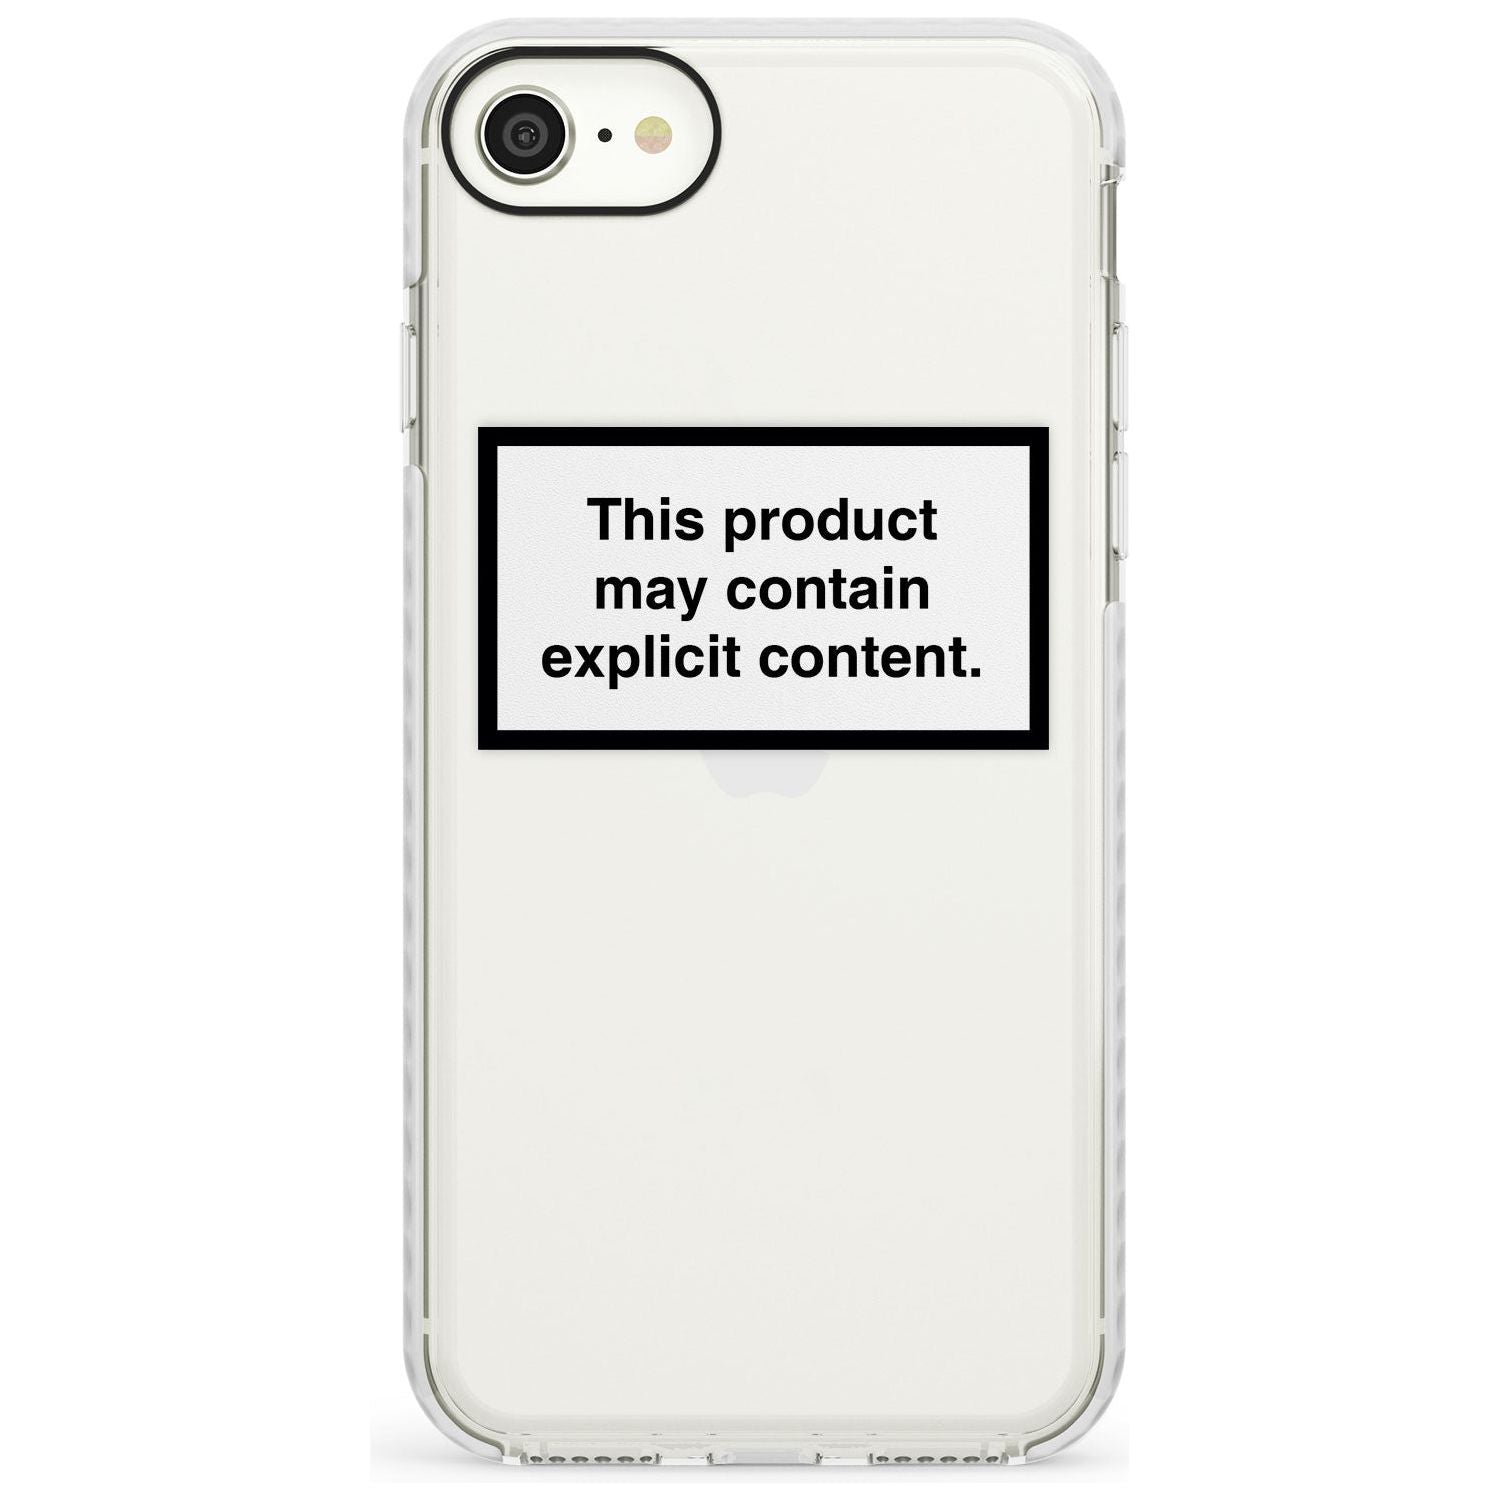 This product may contain explicit content Slim TPU Phone Case for iPhone SE 8 7 Plus